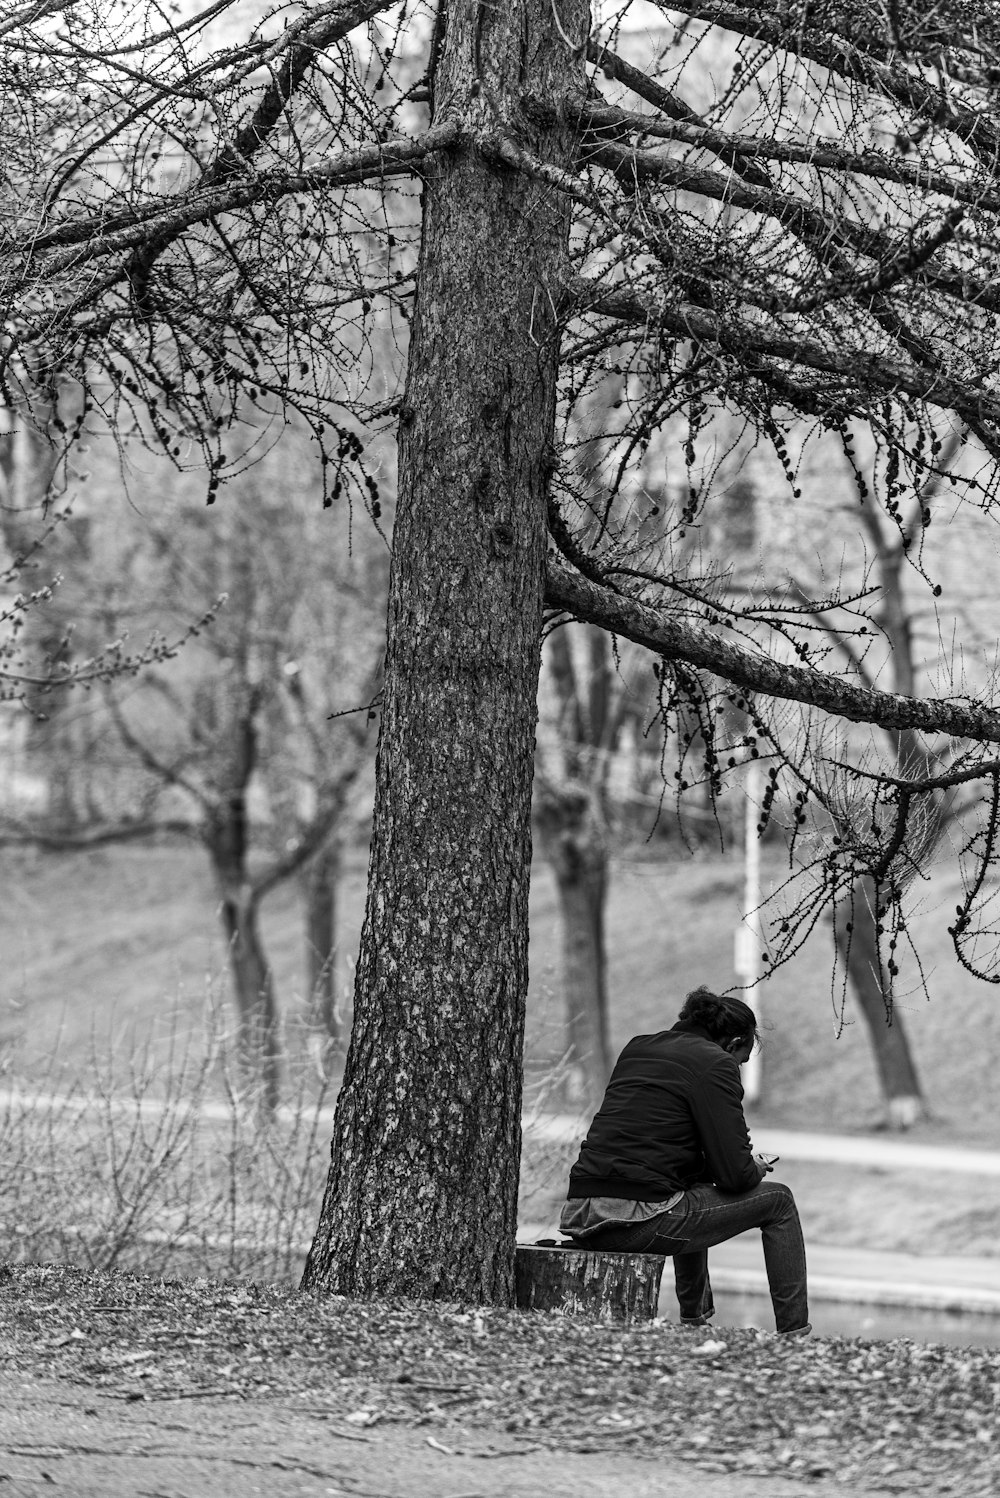 man in black jacket sitting on bench near bare trees during daytime